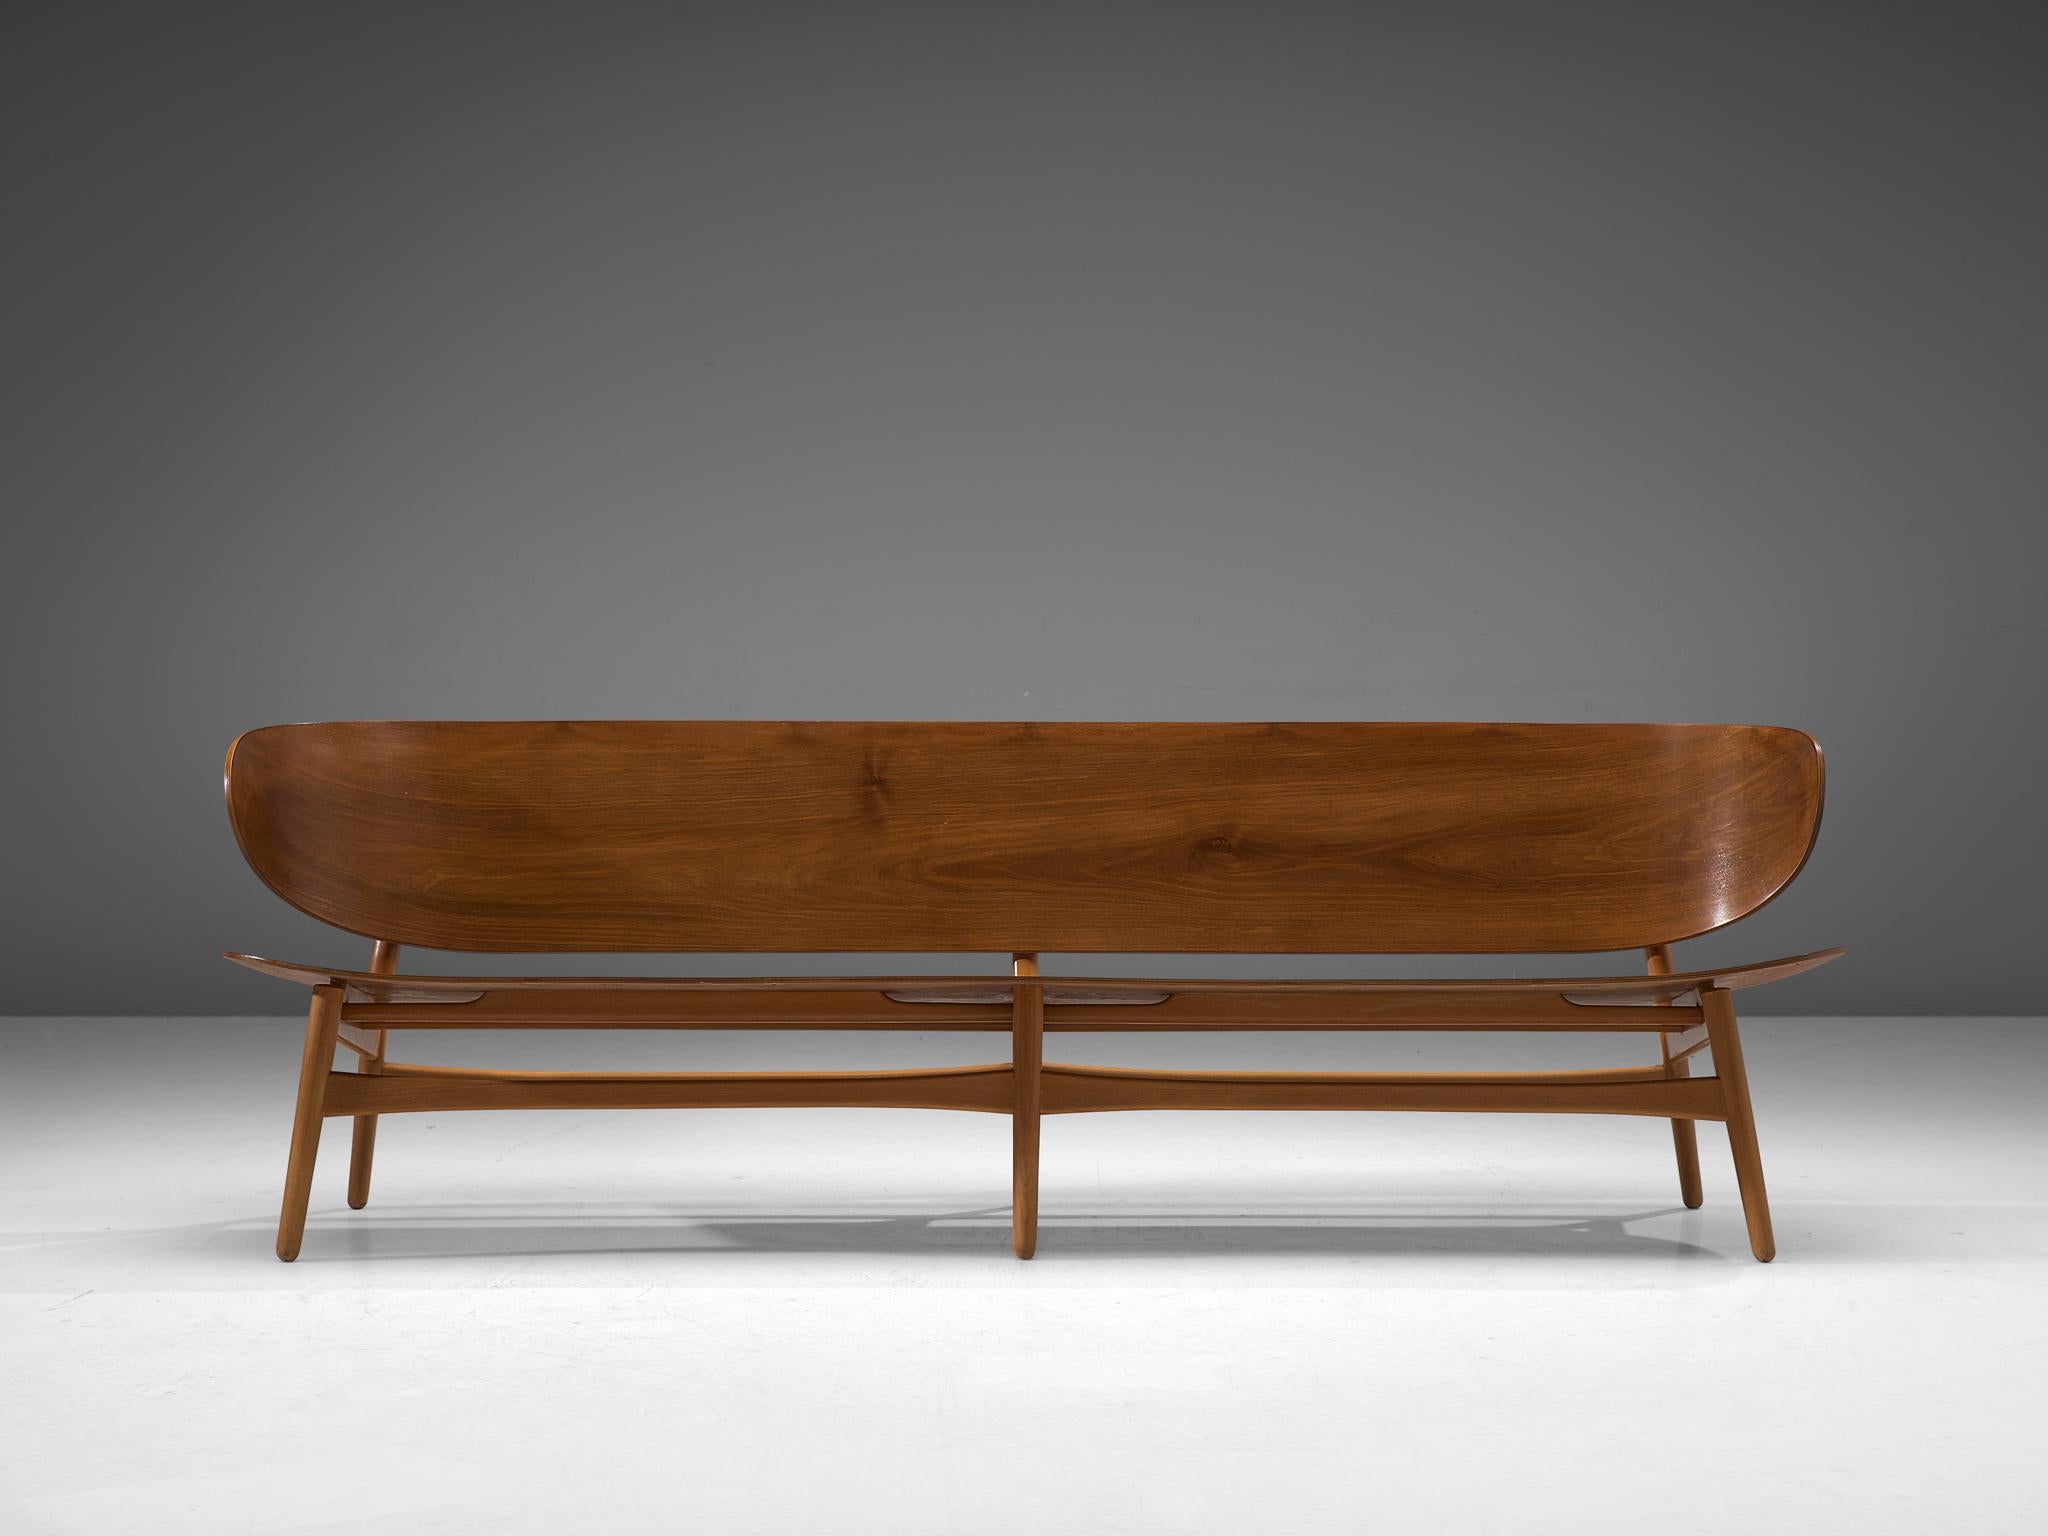 Hans J. Wegner for Fritz Hansen, FH 1935/4 bench, walnut and beech, Denmark, design 1948, manufactured circa 1950

This rare and largest version ever made of the FH 1935 bench with sofa appeal by Hans J. Wegner. This piece is one of the results of